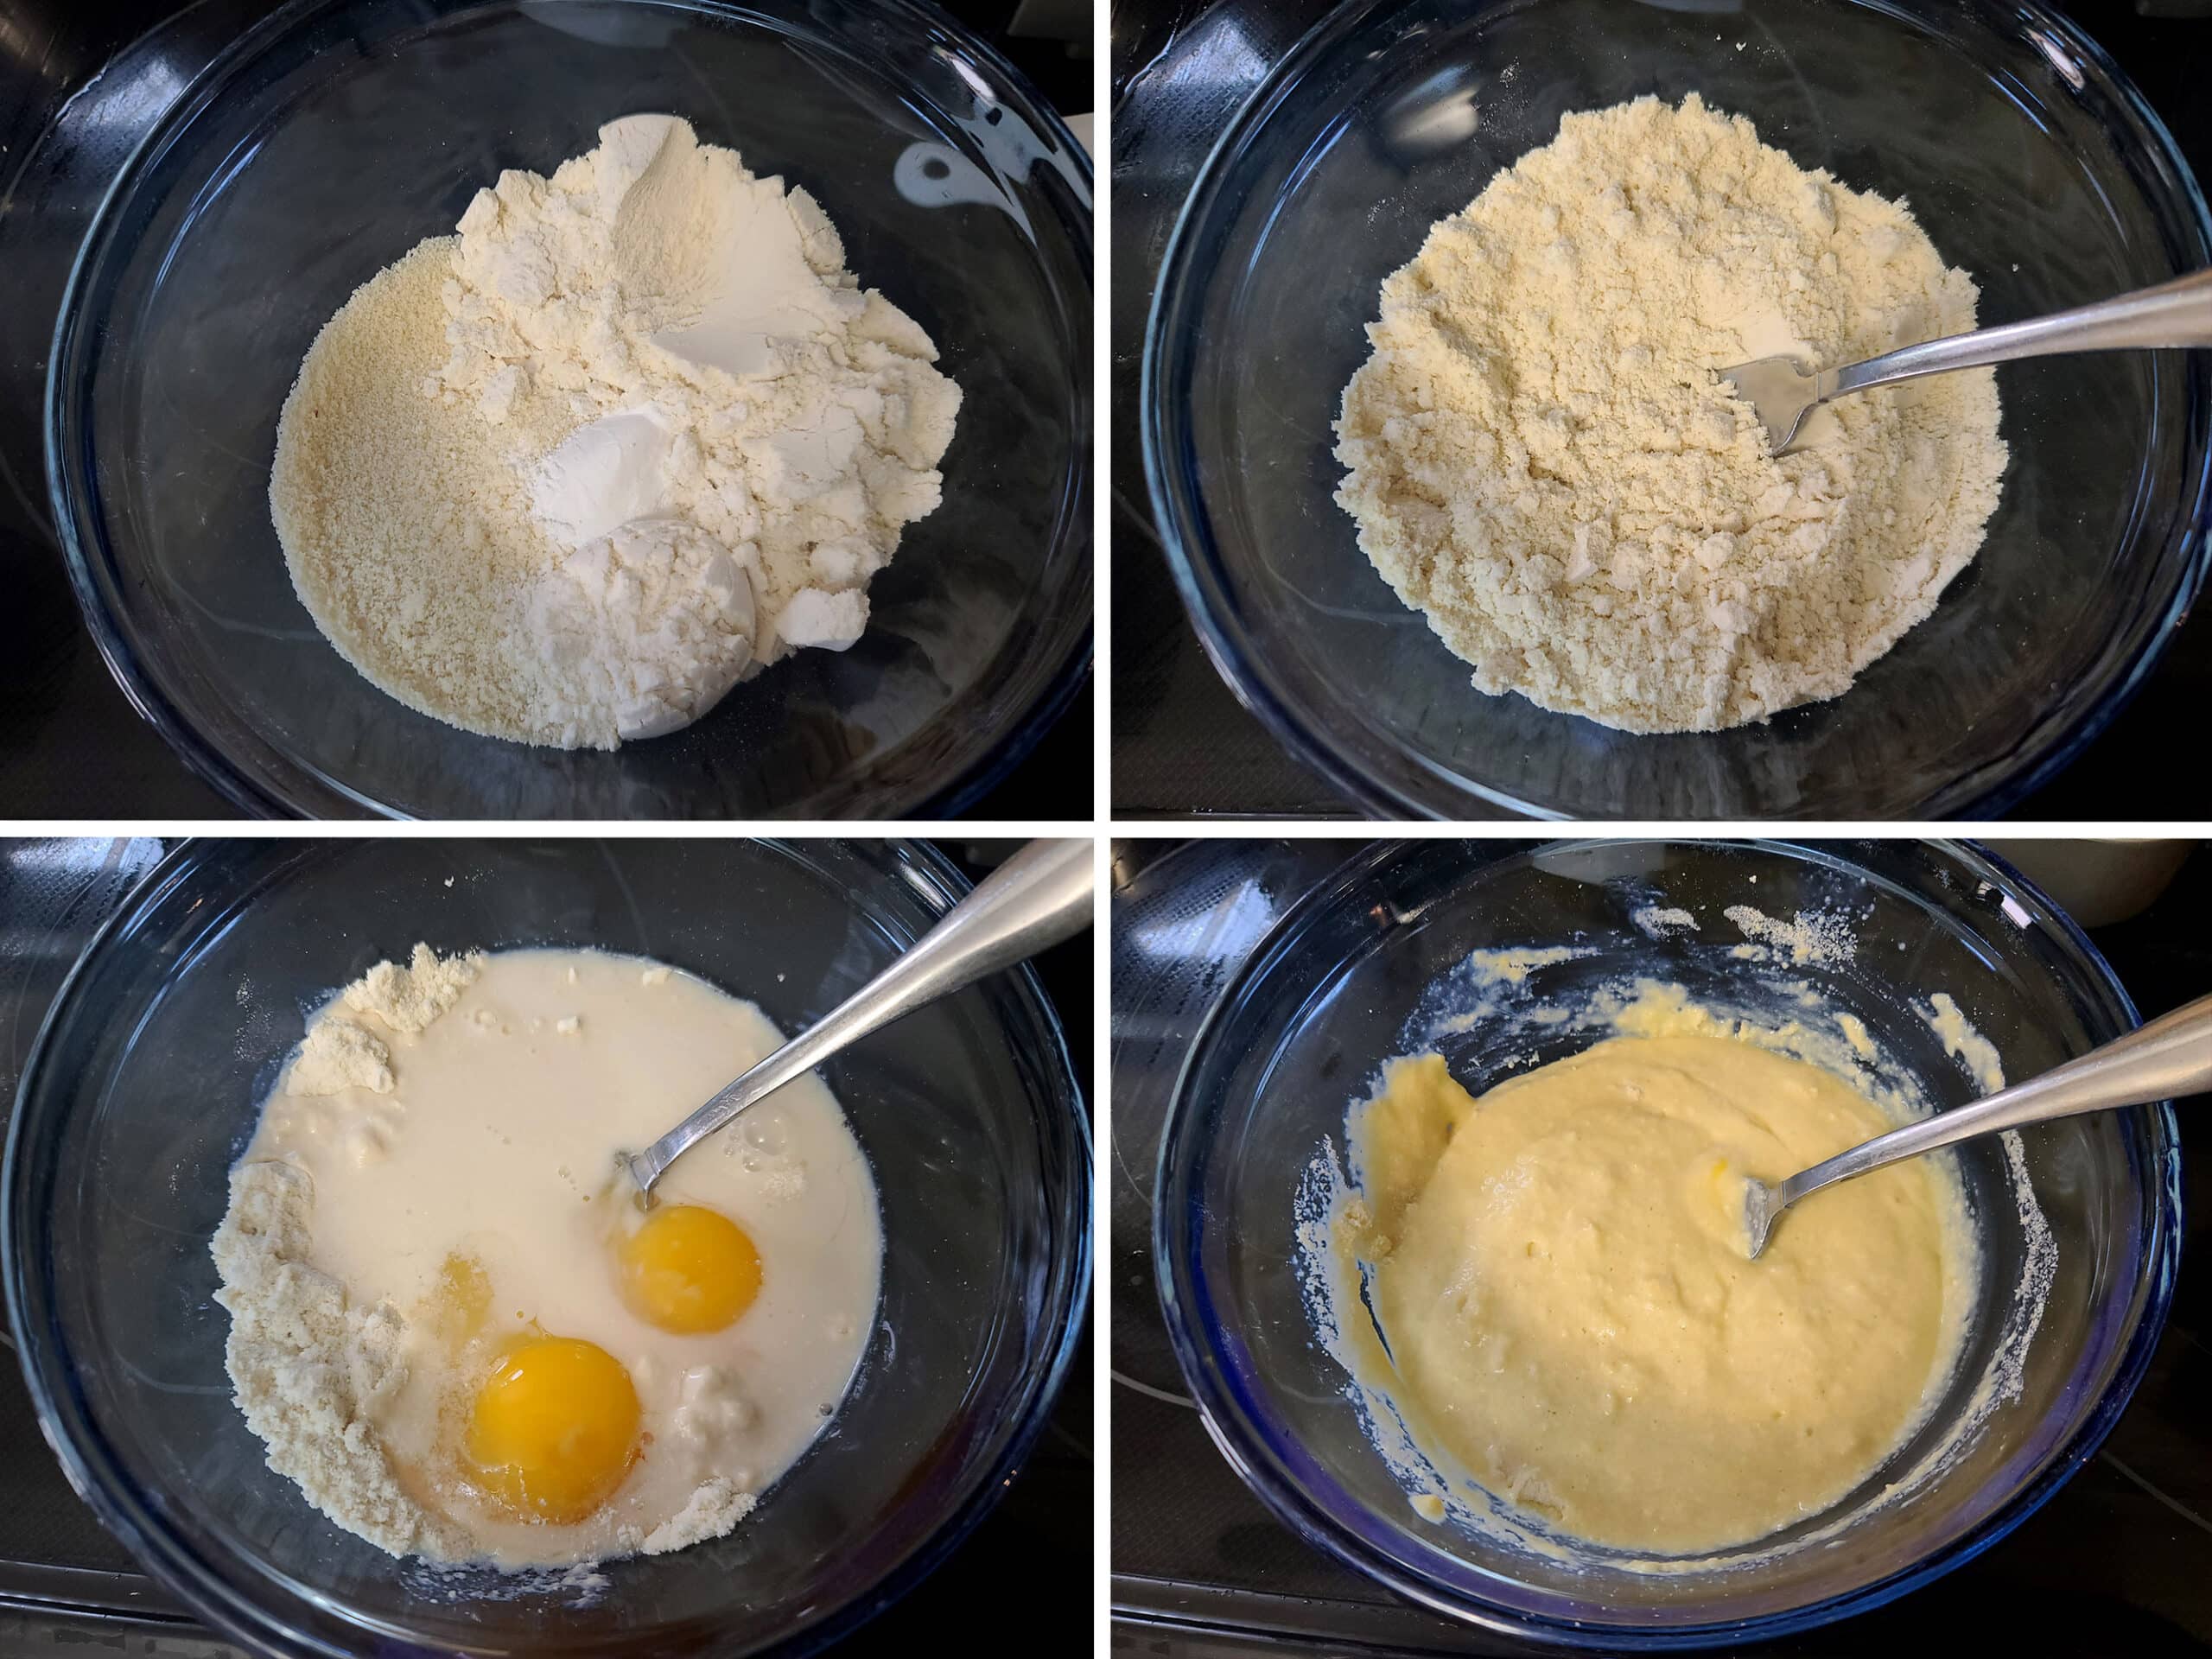 A 4 part image showing the dry ingredients being mixed together in a bowl, the milk and eggs added, and everything mixed into a smooth yellow batter.